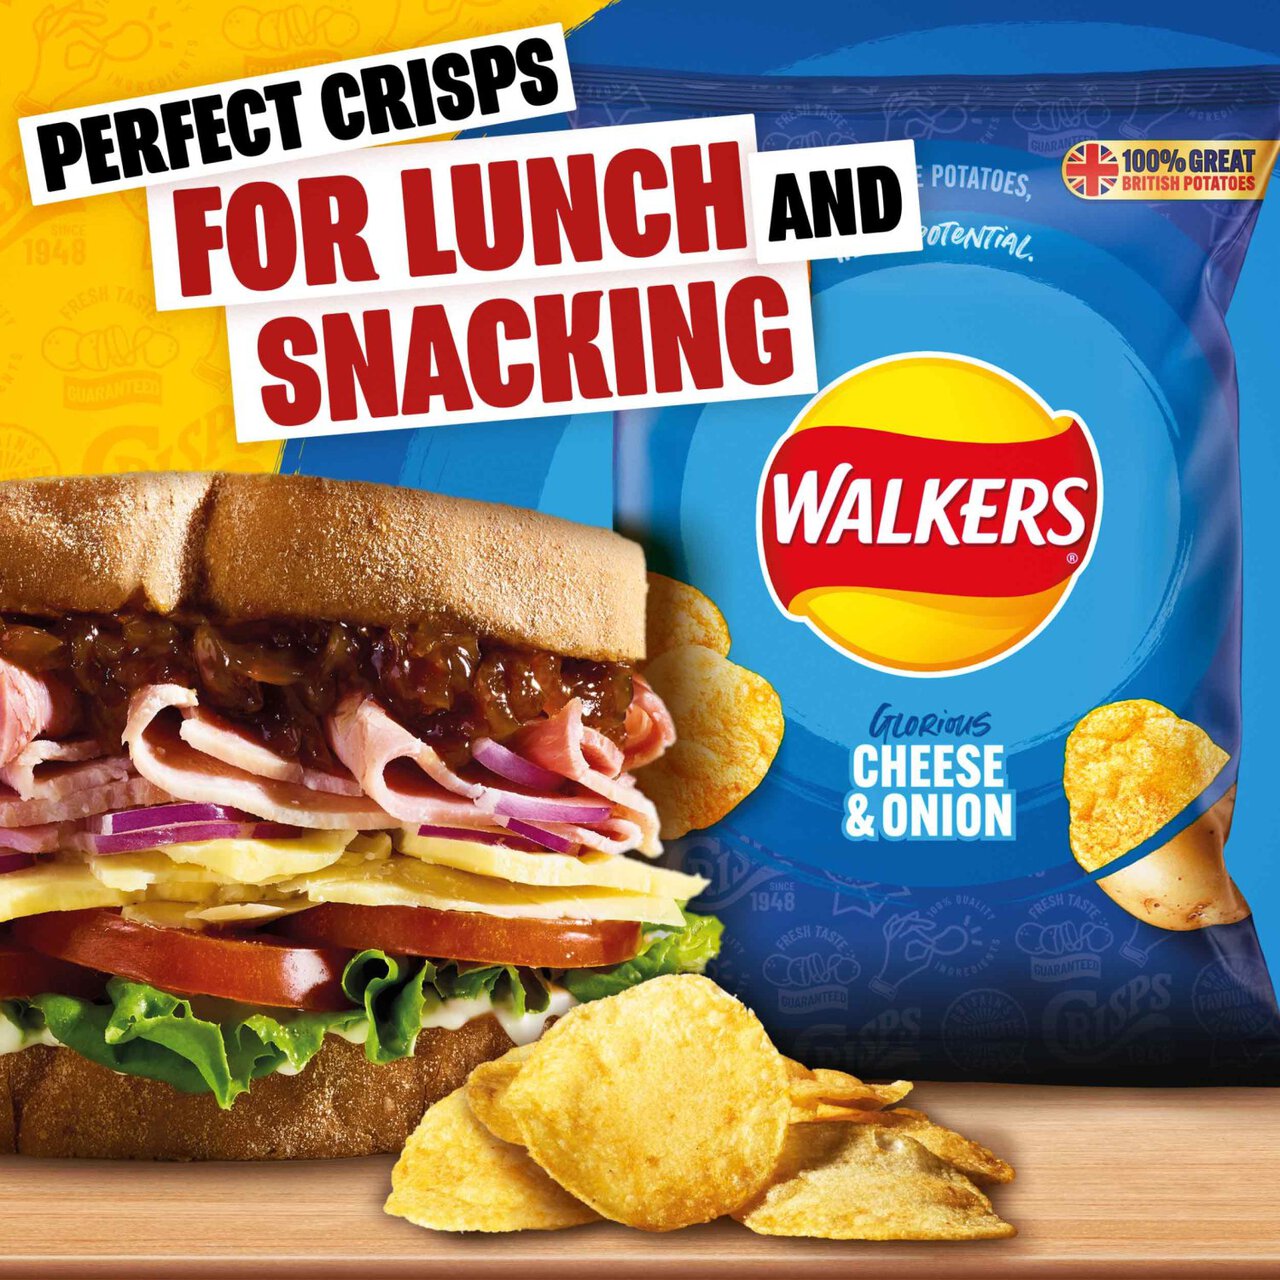 Walkers Cheese & Onion Crisps 6 per pack